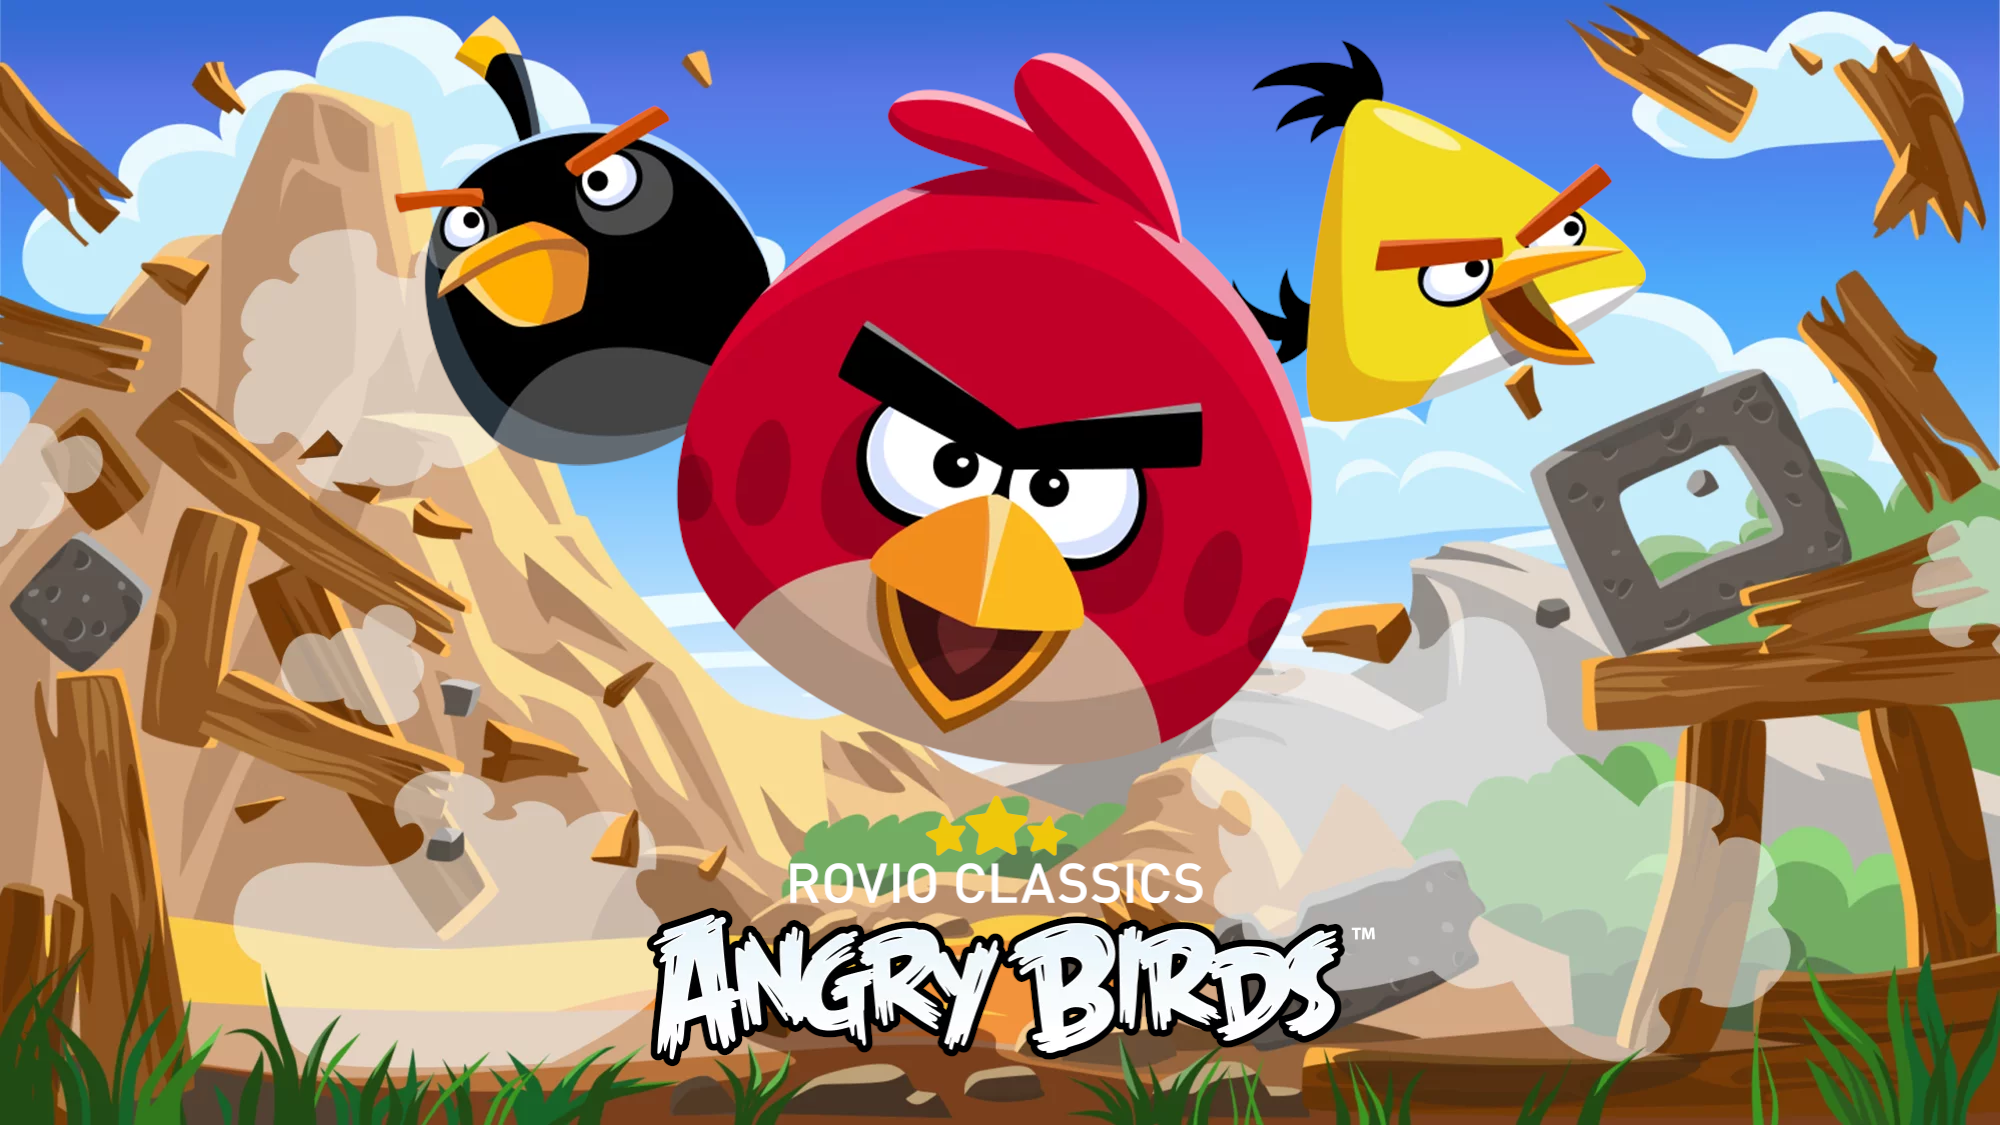 Rovio delists original Angry Birds due to impact on free-to-play games |  